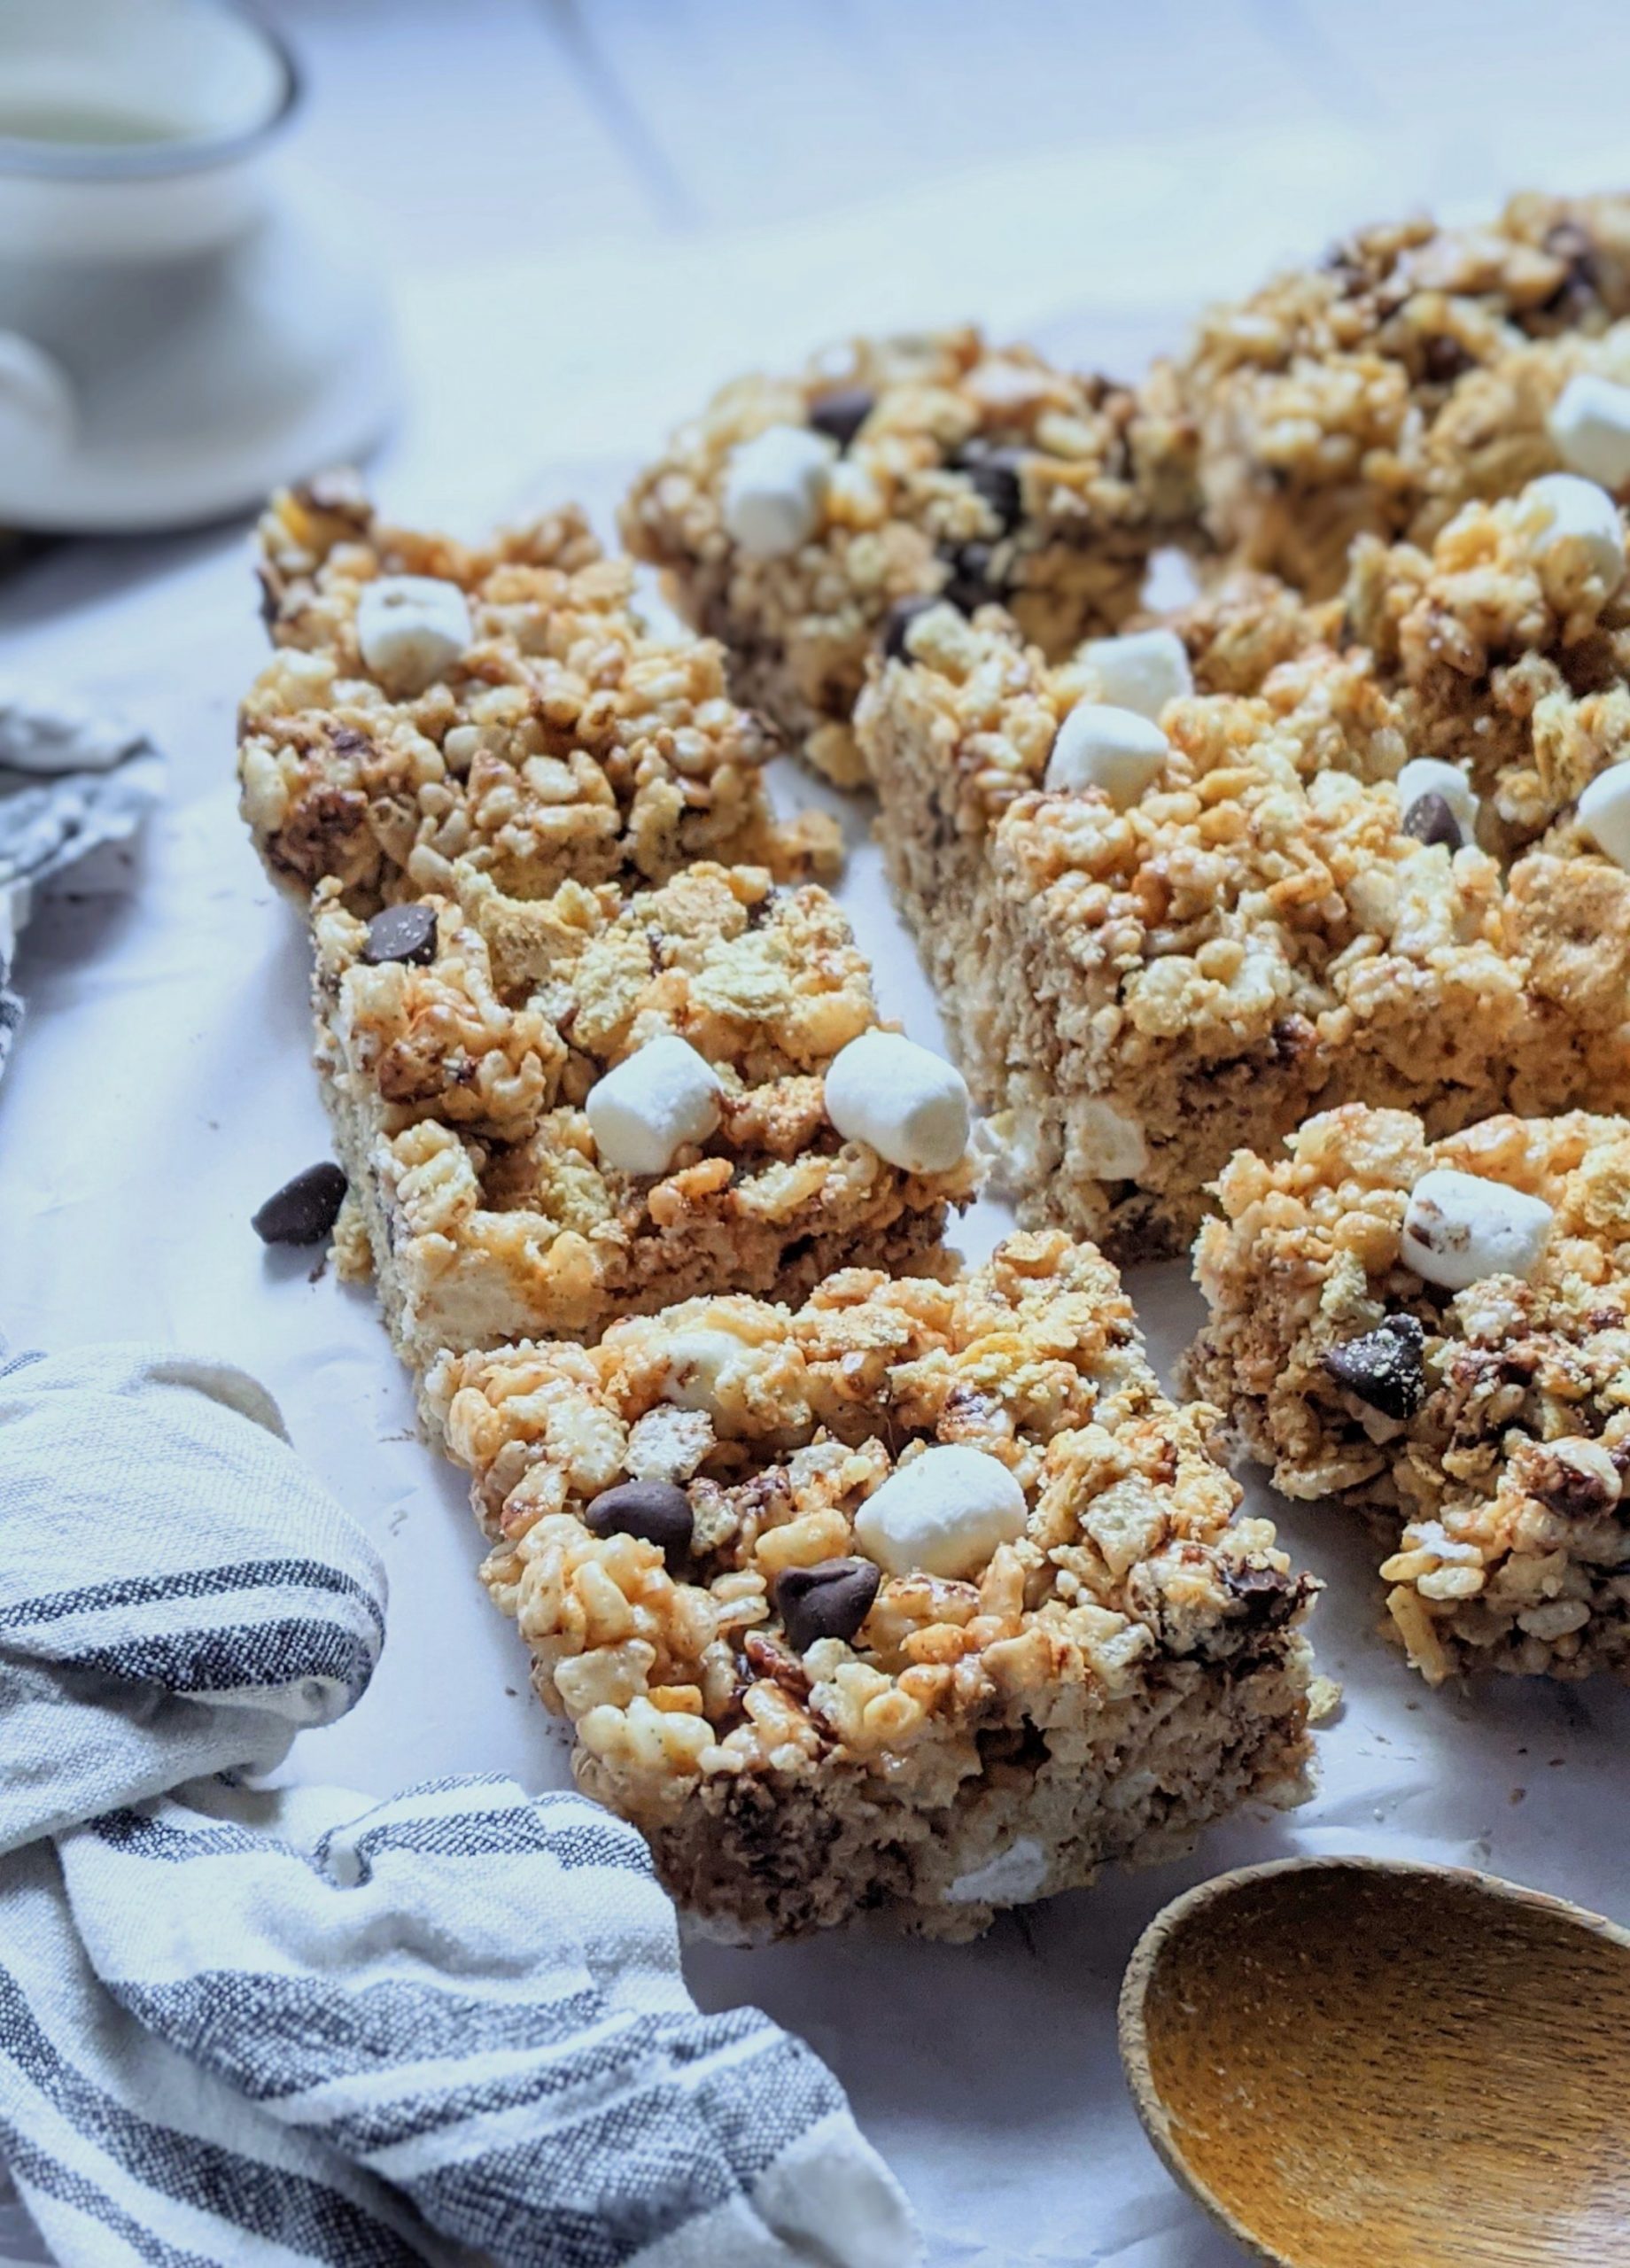 fun rice krispie treats with s'mores campfire marshmallow rice krispies treats milk chocolate and vanilla dessert bars with rice cereal summer desserts for a bbq party potluck dessert or cookout treats